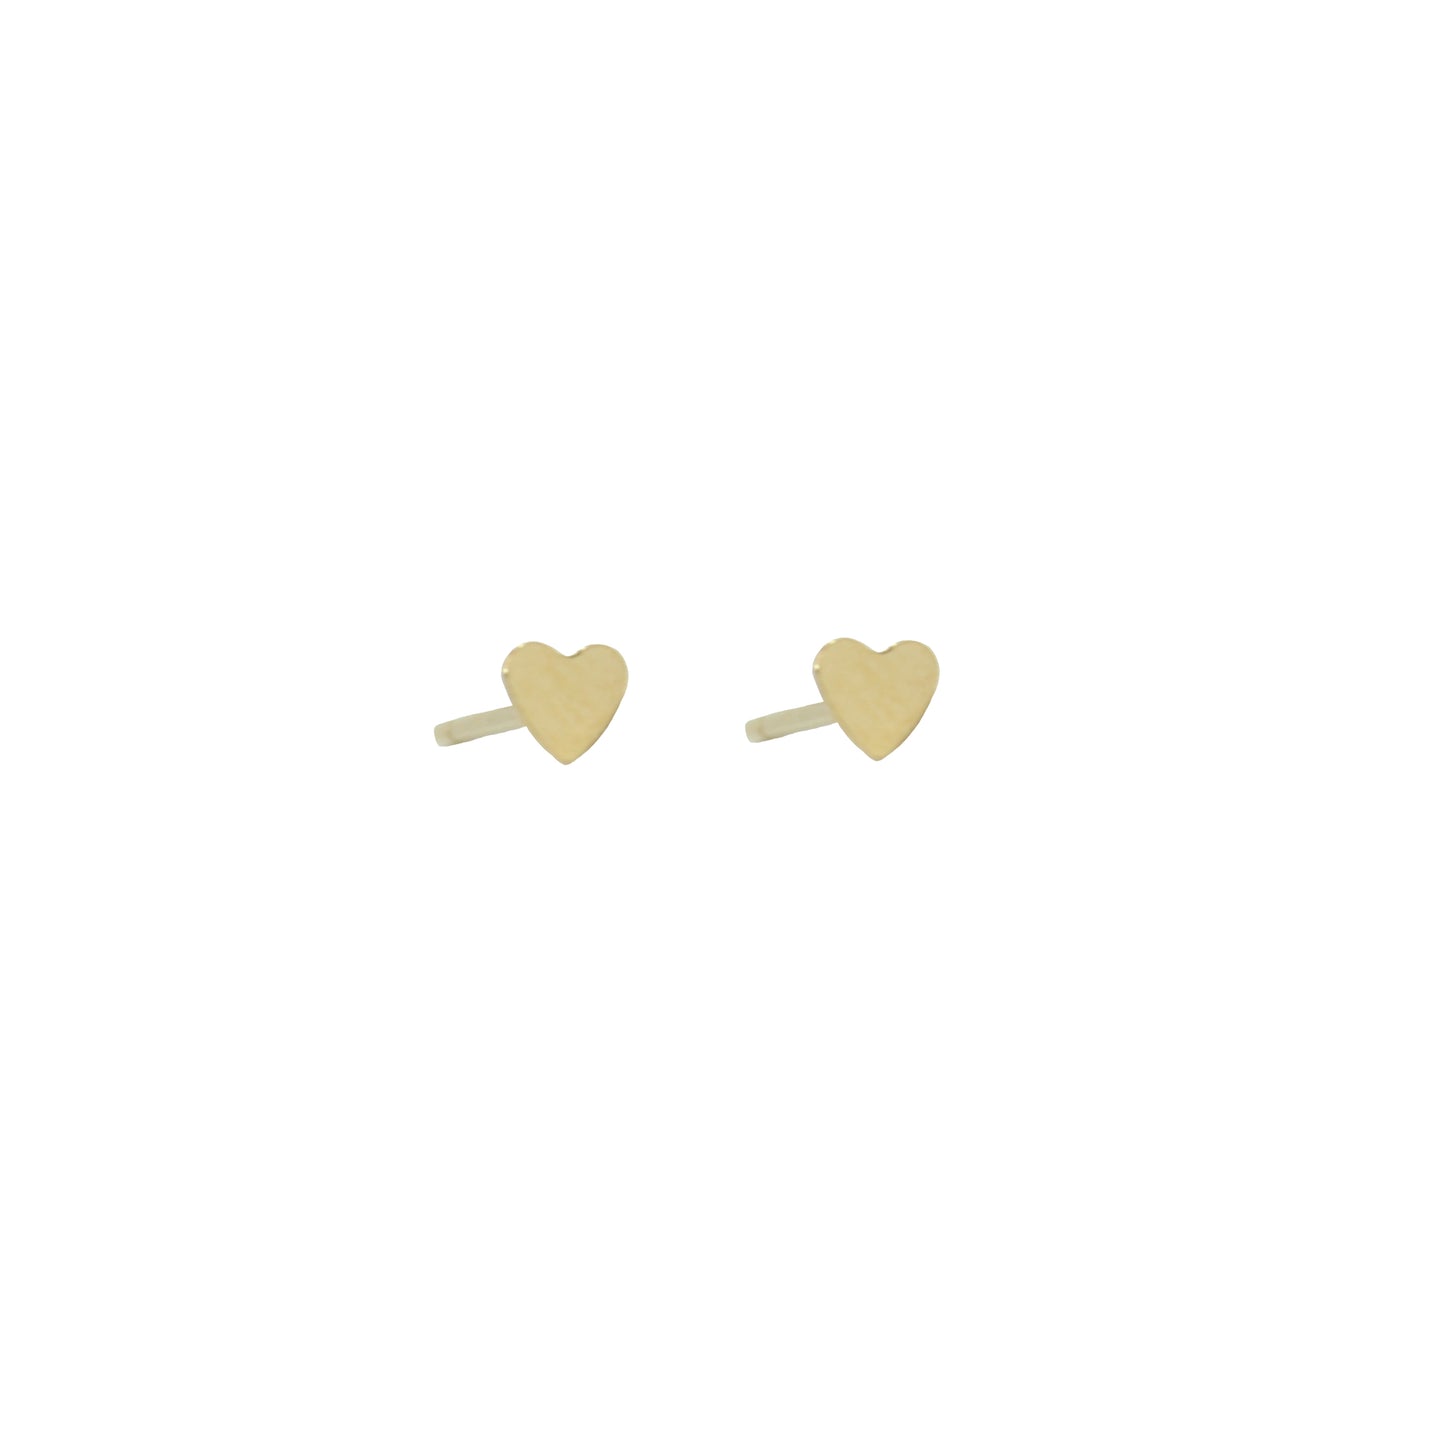 gold filled heart stamped stud. gold heart stamped stud. heart stamped stud.  heart stud earring. gold filled heart stud earring. heart stud. gold heart earring. gold heart stud. heart earrings for little girls. heart earrings for valentines day. Gems by Laura. 